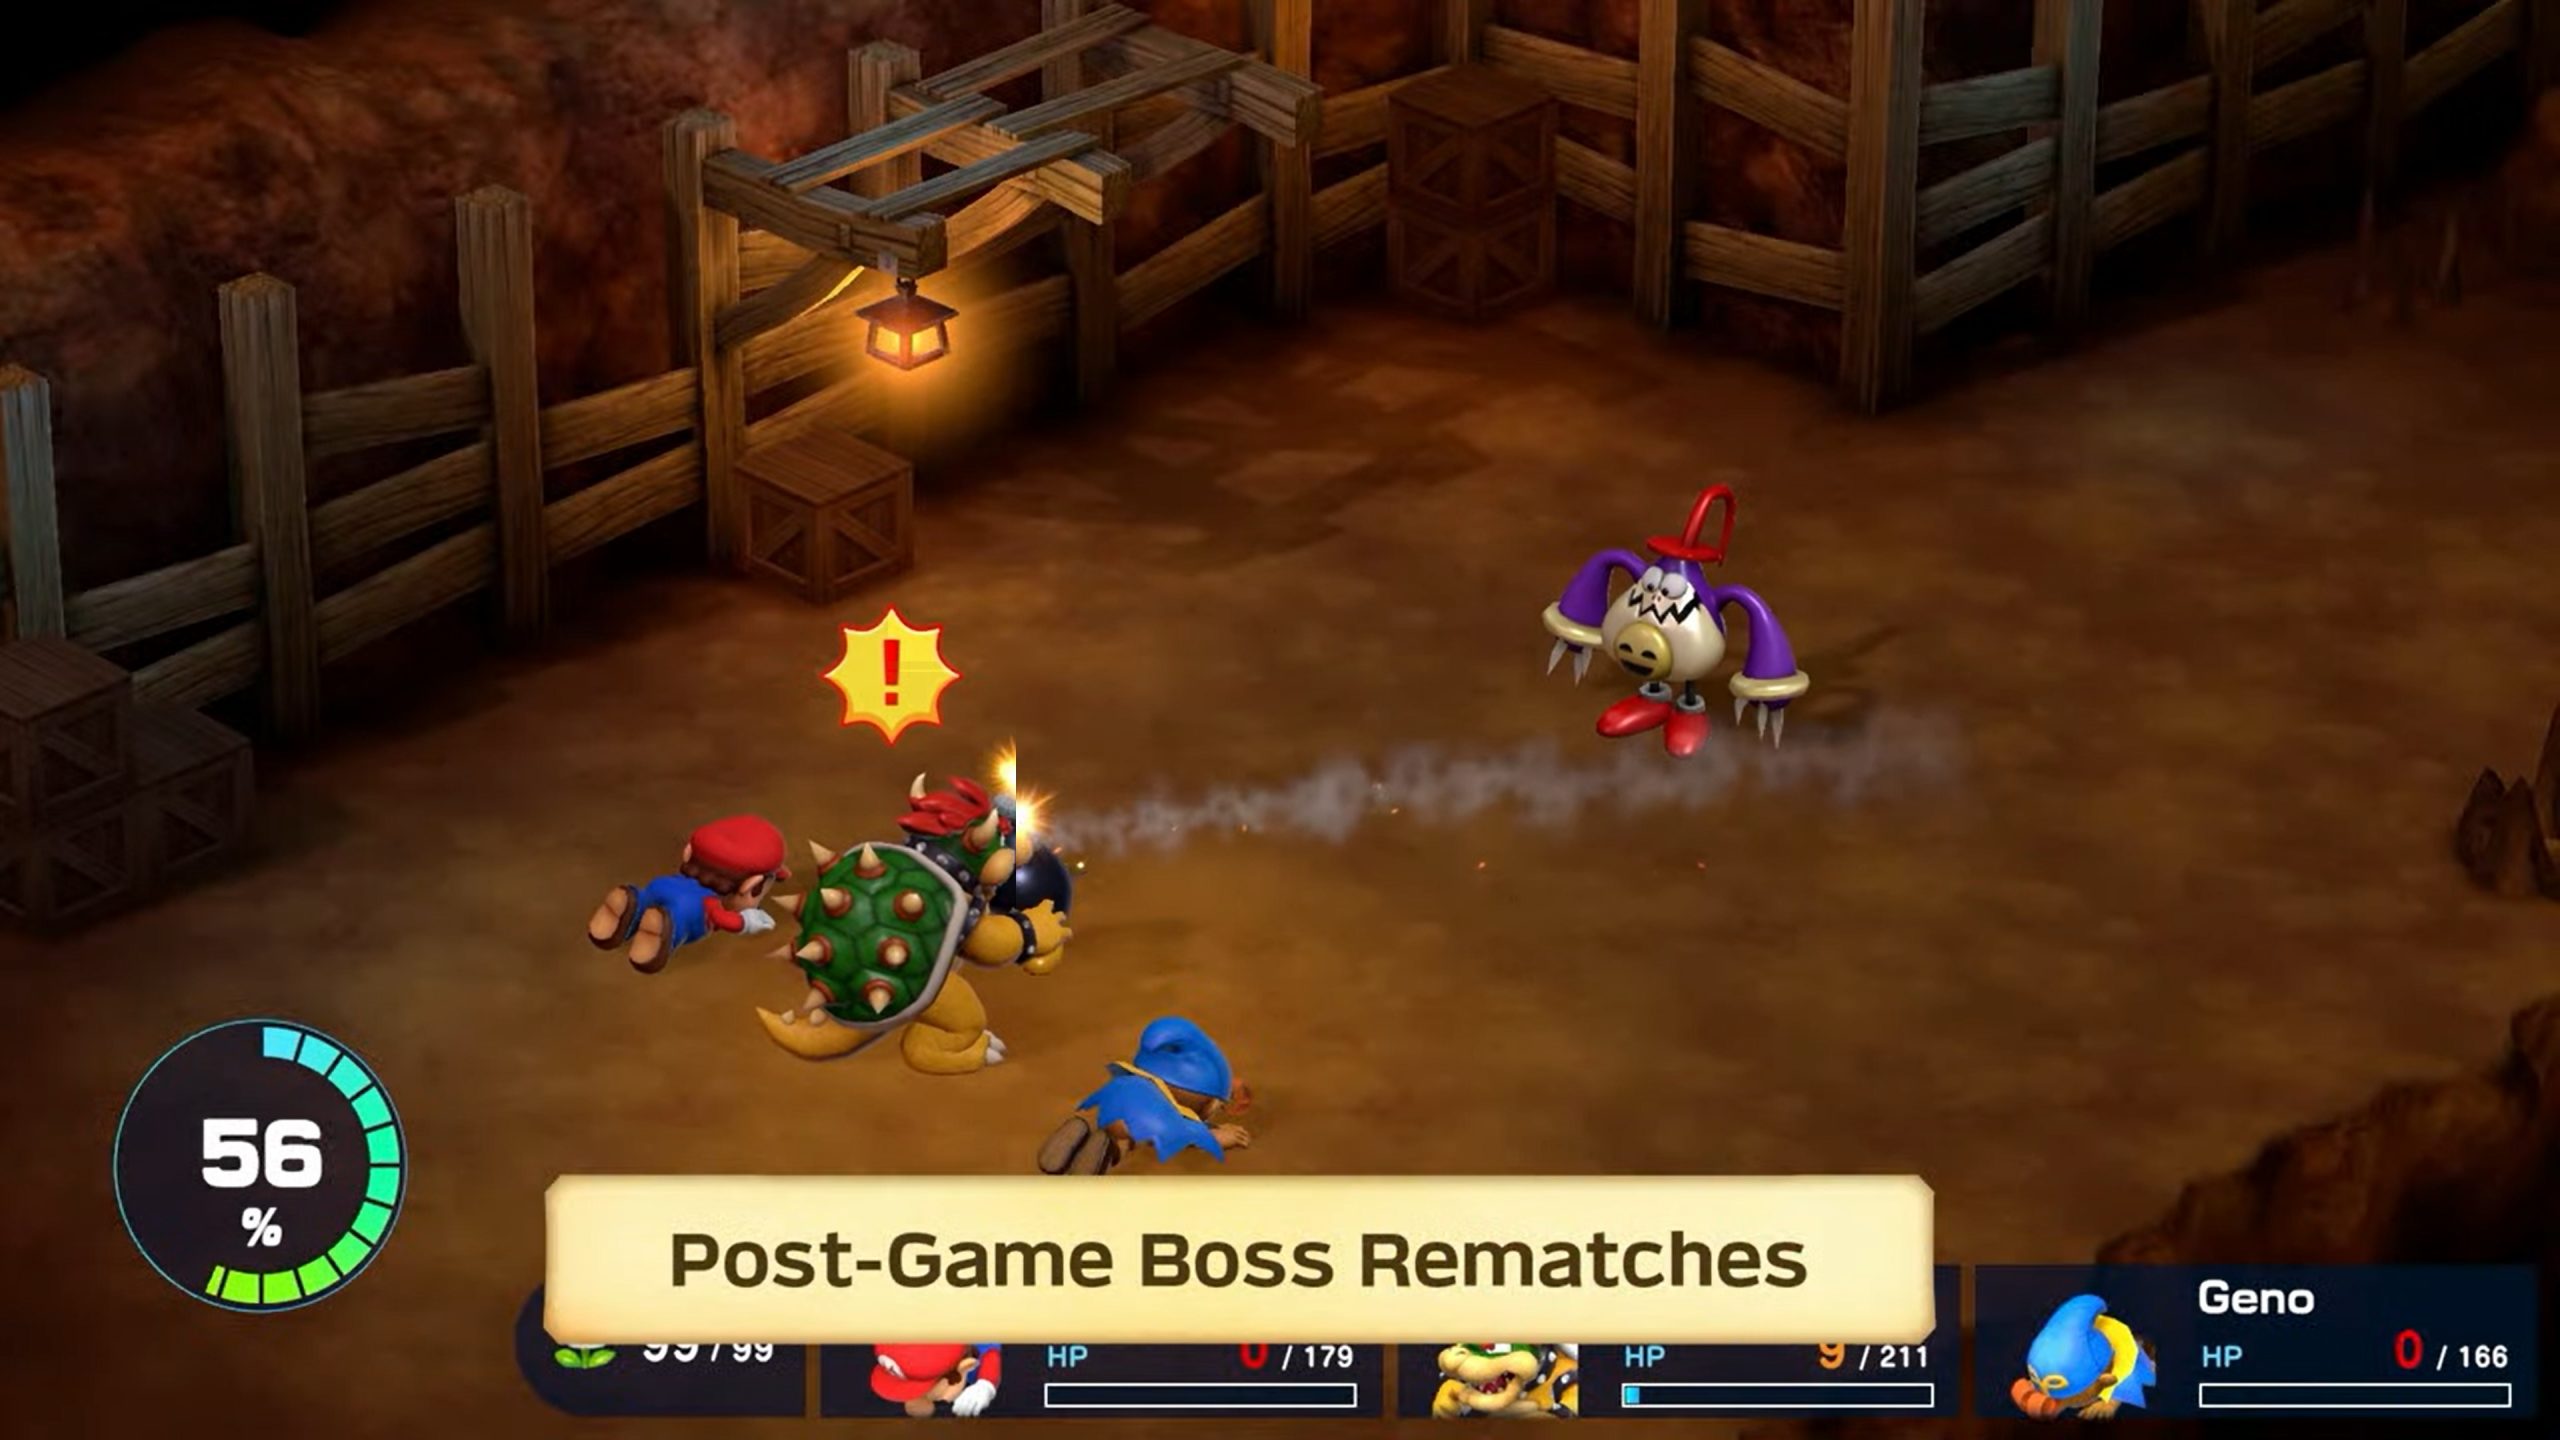 Super Mario RPG to include post-game boss rematches